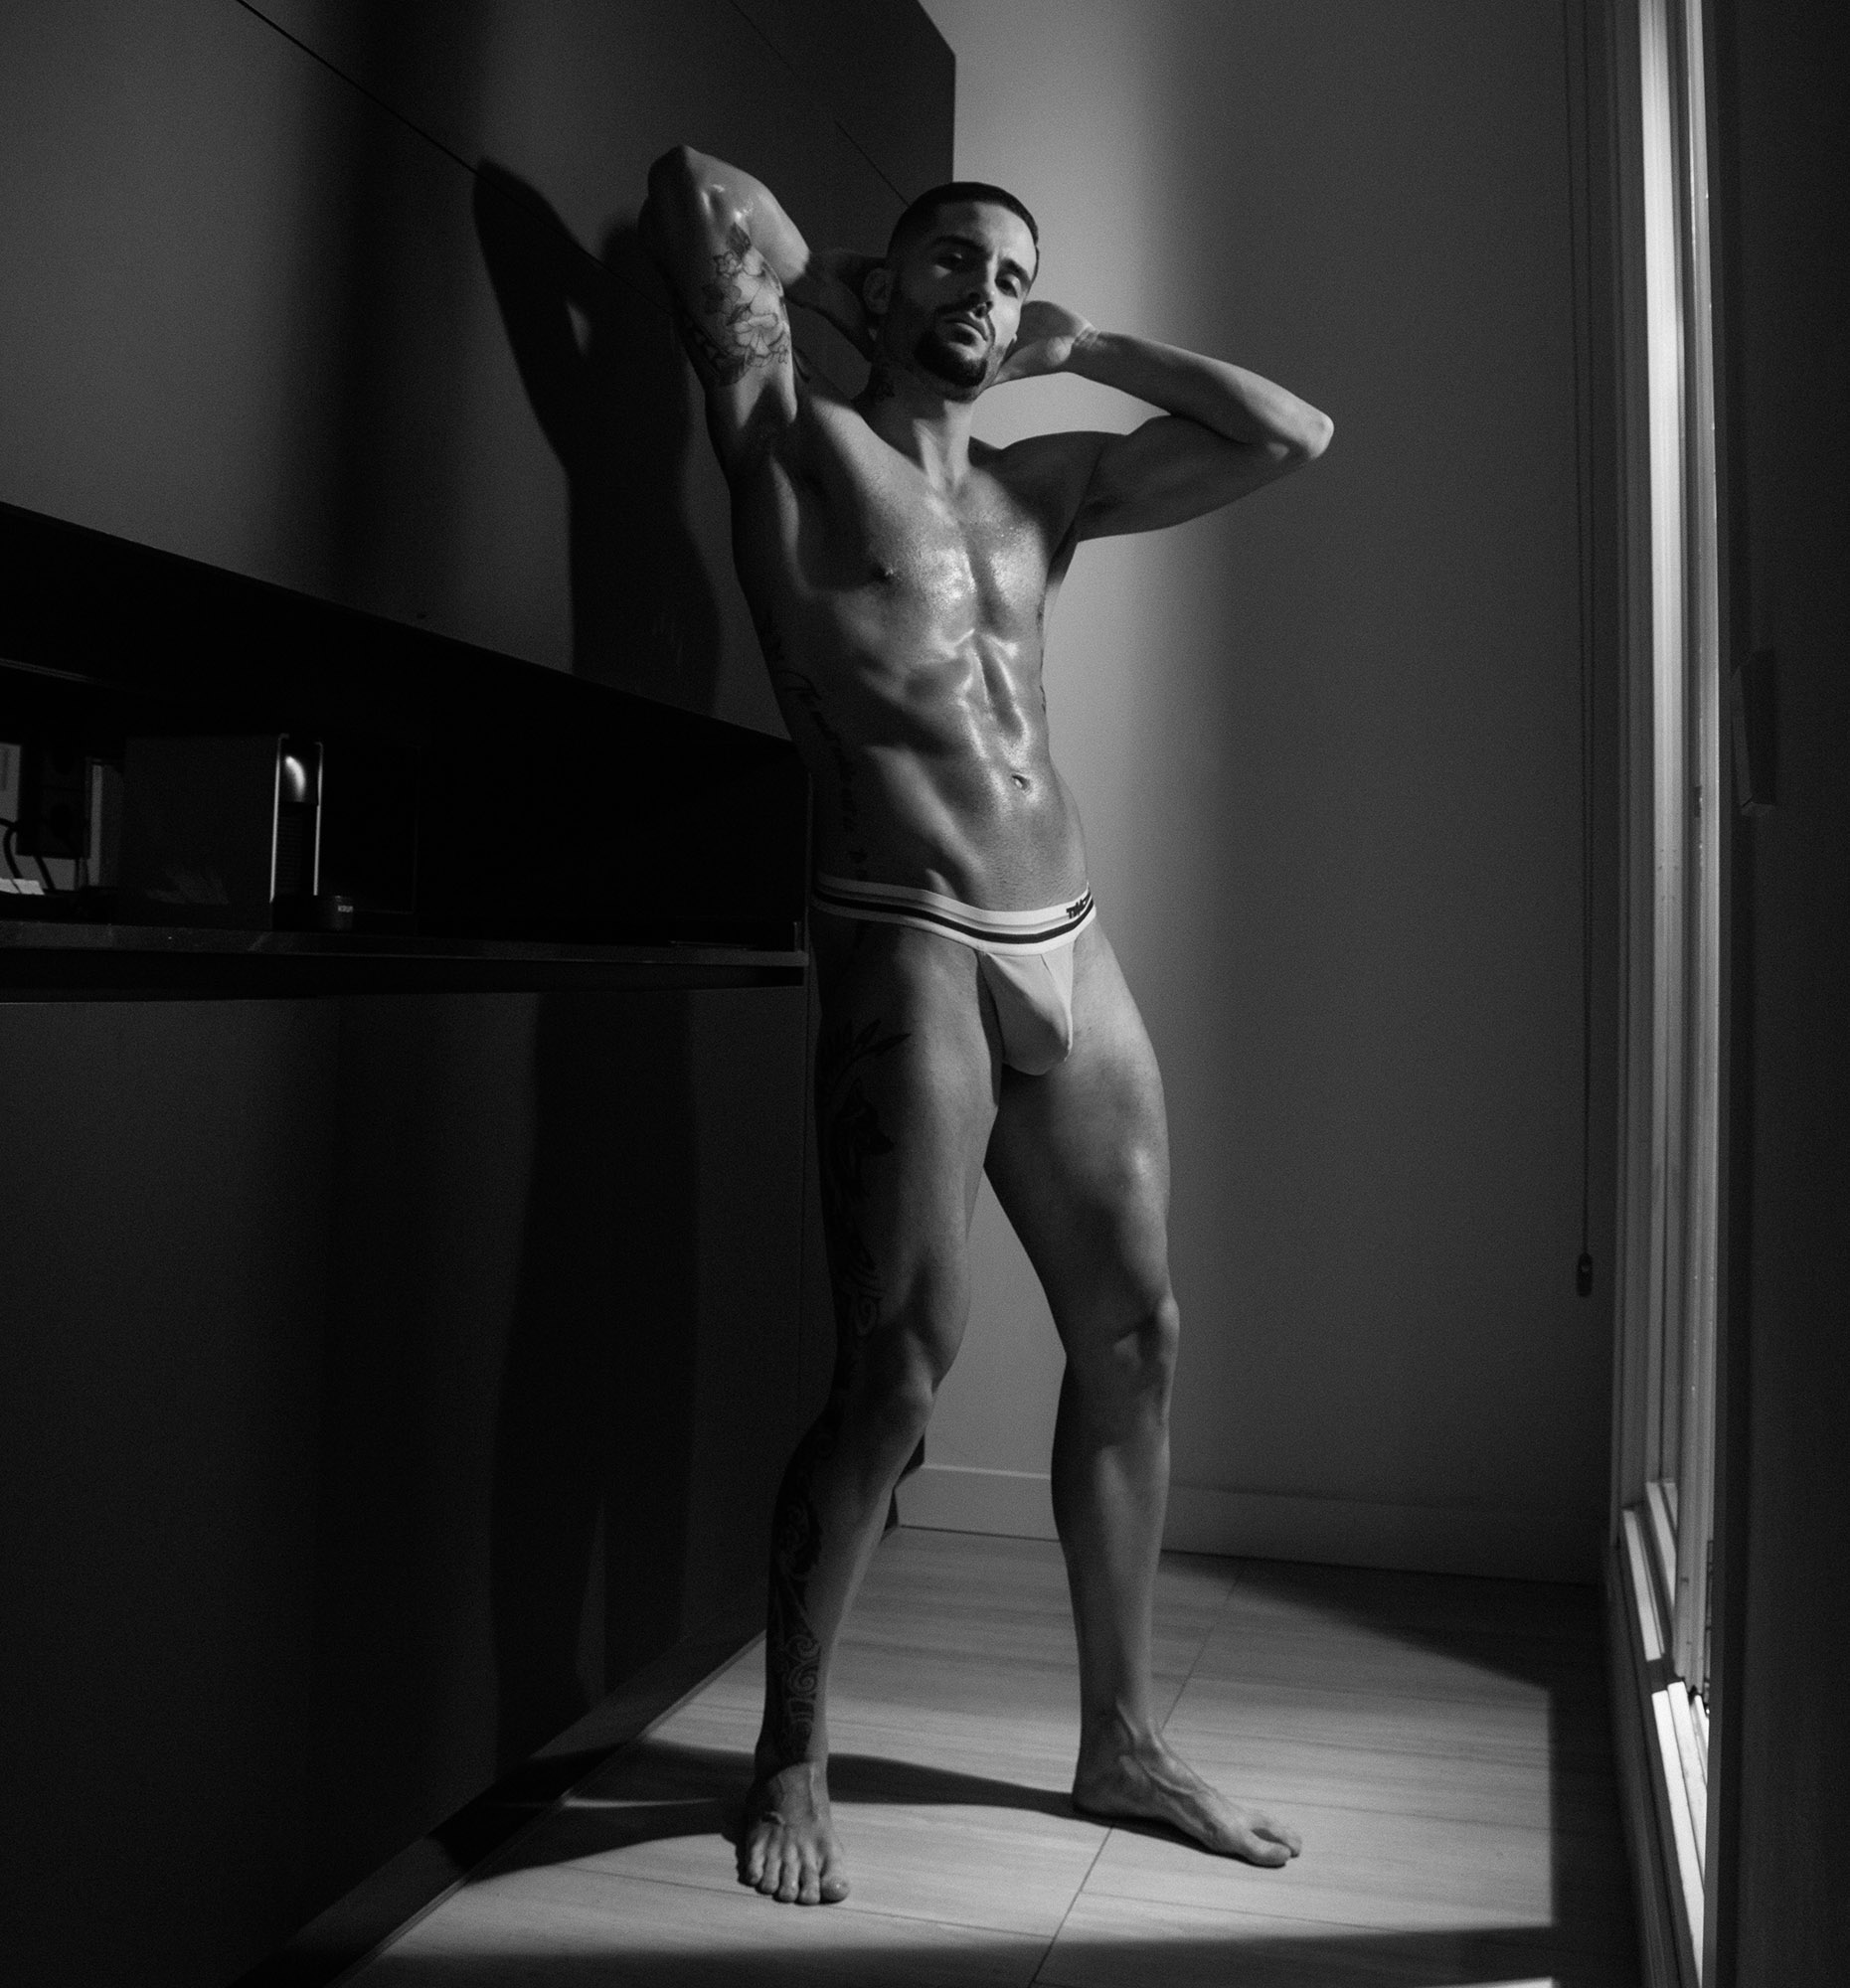 – NSFW – Saul by Gus.Lag, part 3.